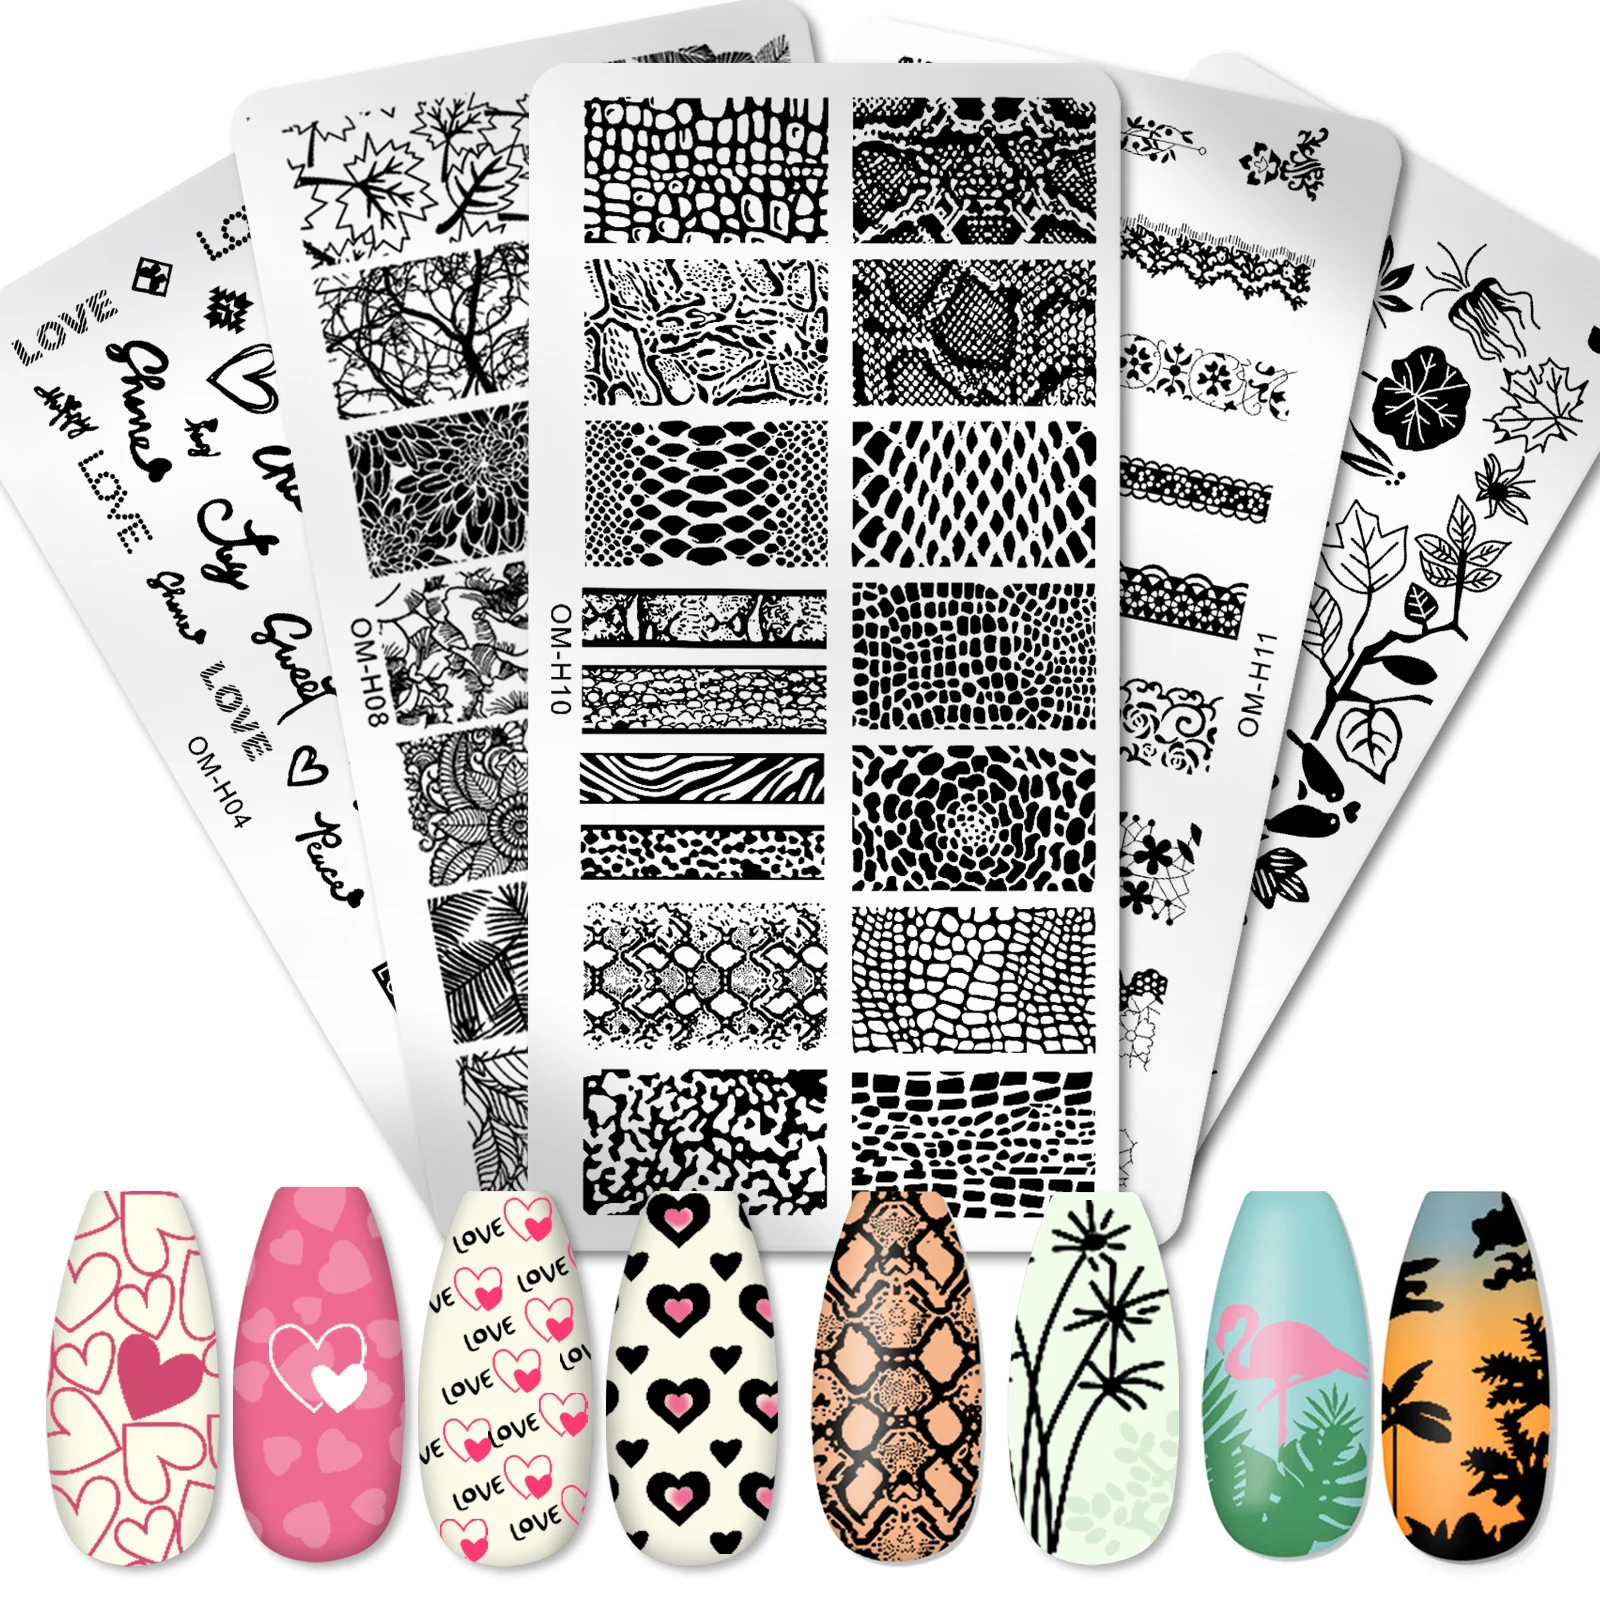 

1 Pc Rectangular Nail Art Stamper Plate Leaf Leopard Patterns Manicure Template Nails Accessories Print Butterfly Image Stencil